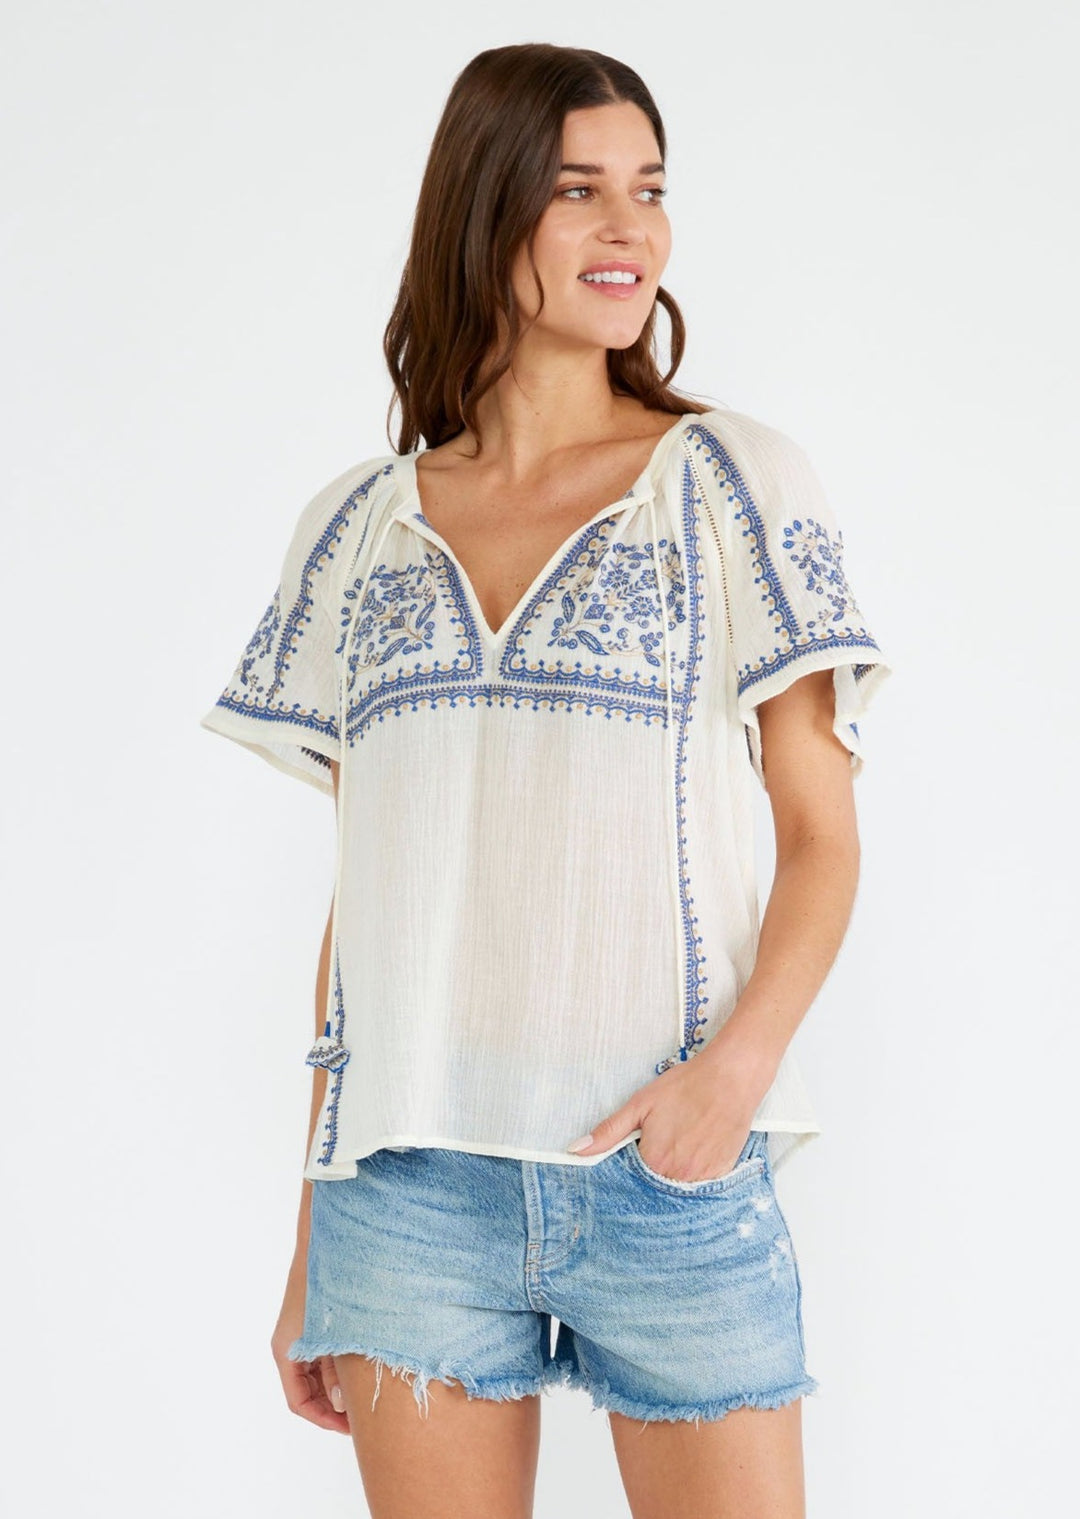 Lovestitch Joelle Embroidered Tee (Natural/Blue)